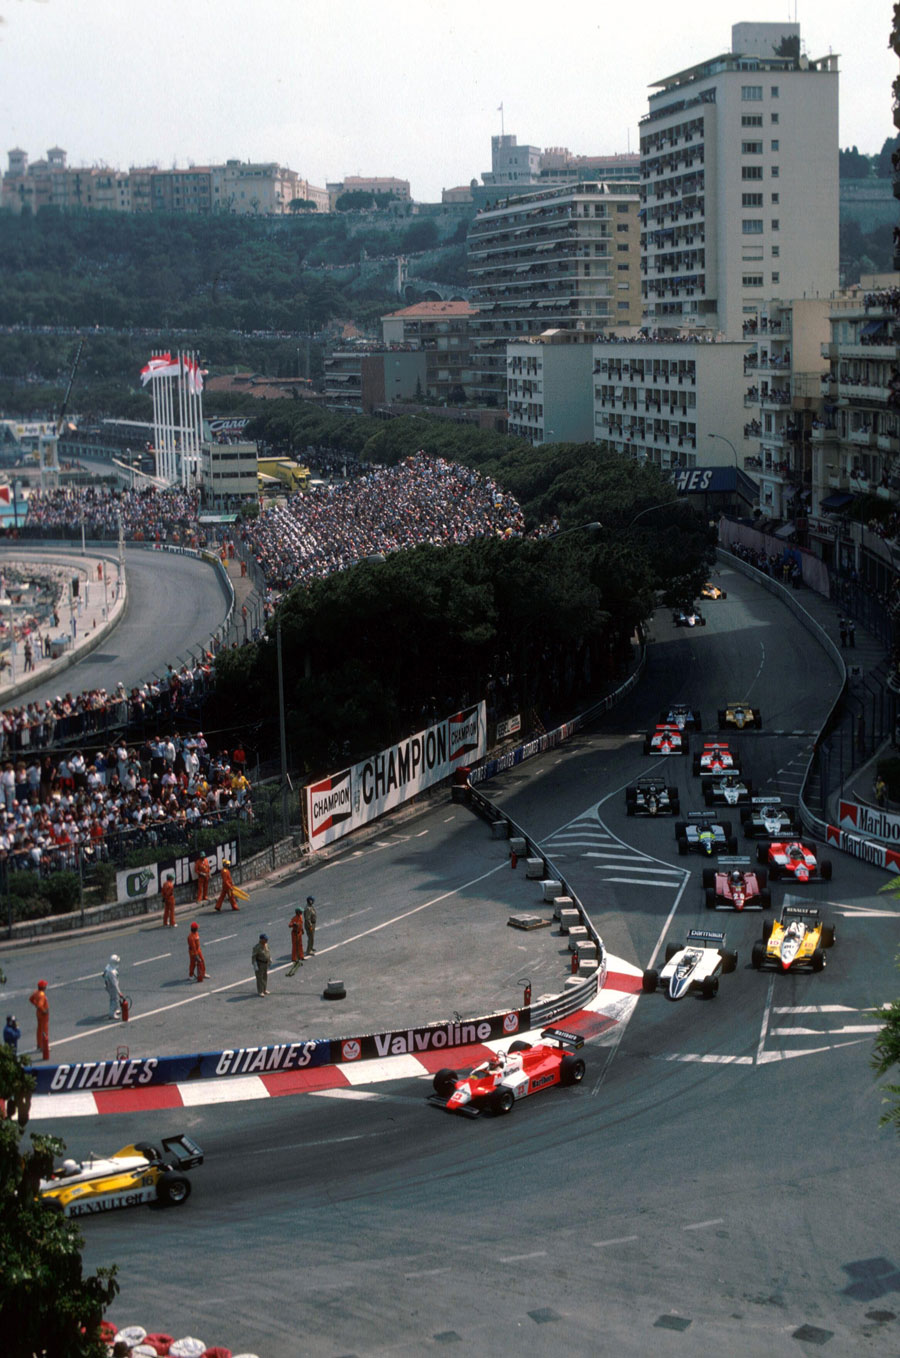 Rene Arnoux leads Bruno Giacomelli and Riccardo Patrese through the first corner with Alain Prost in fourth place